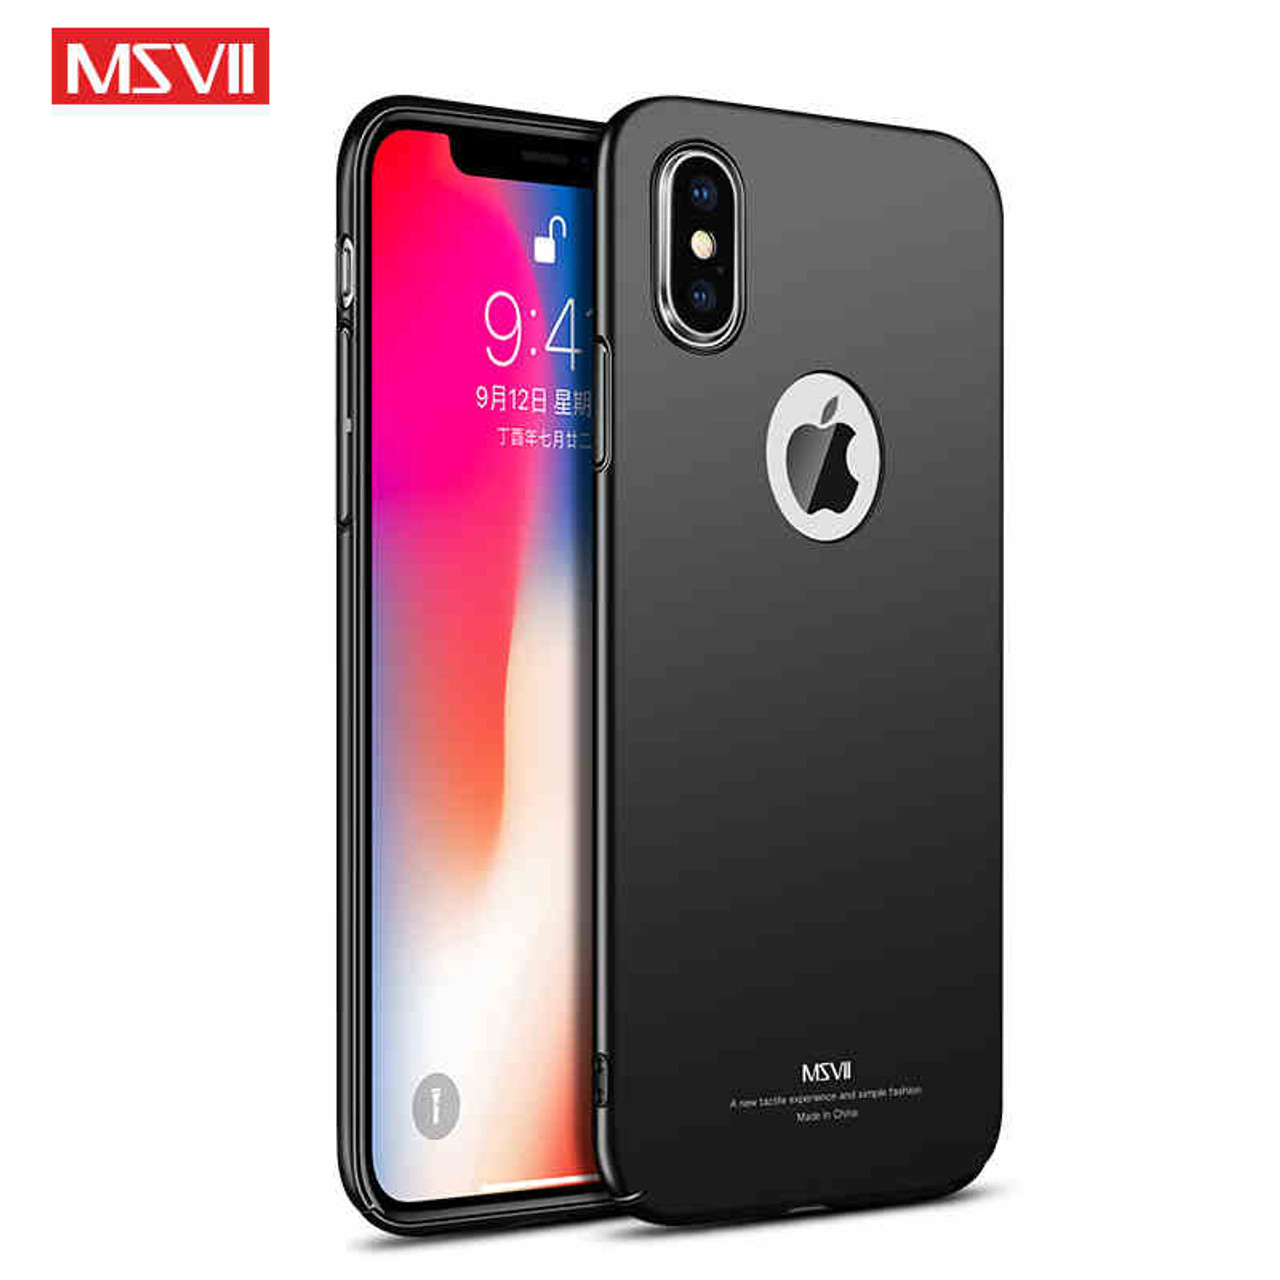 Msvii Cases For Iphone X Case Cover Silm Frosted Coque For Apple Iphone Xs Max Case Hard Phone Cover For Iphone Xs Xr Iphone10 Onshopdeals Com